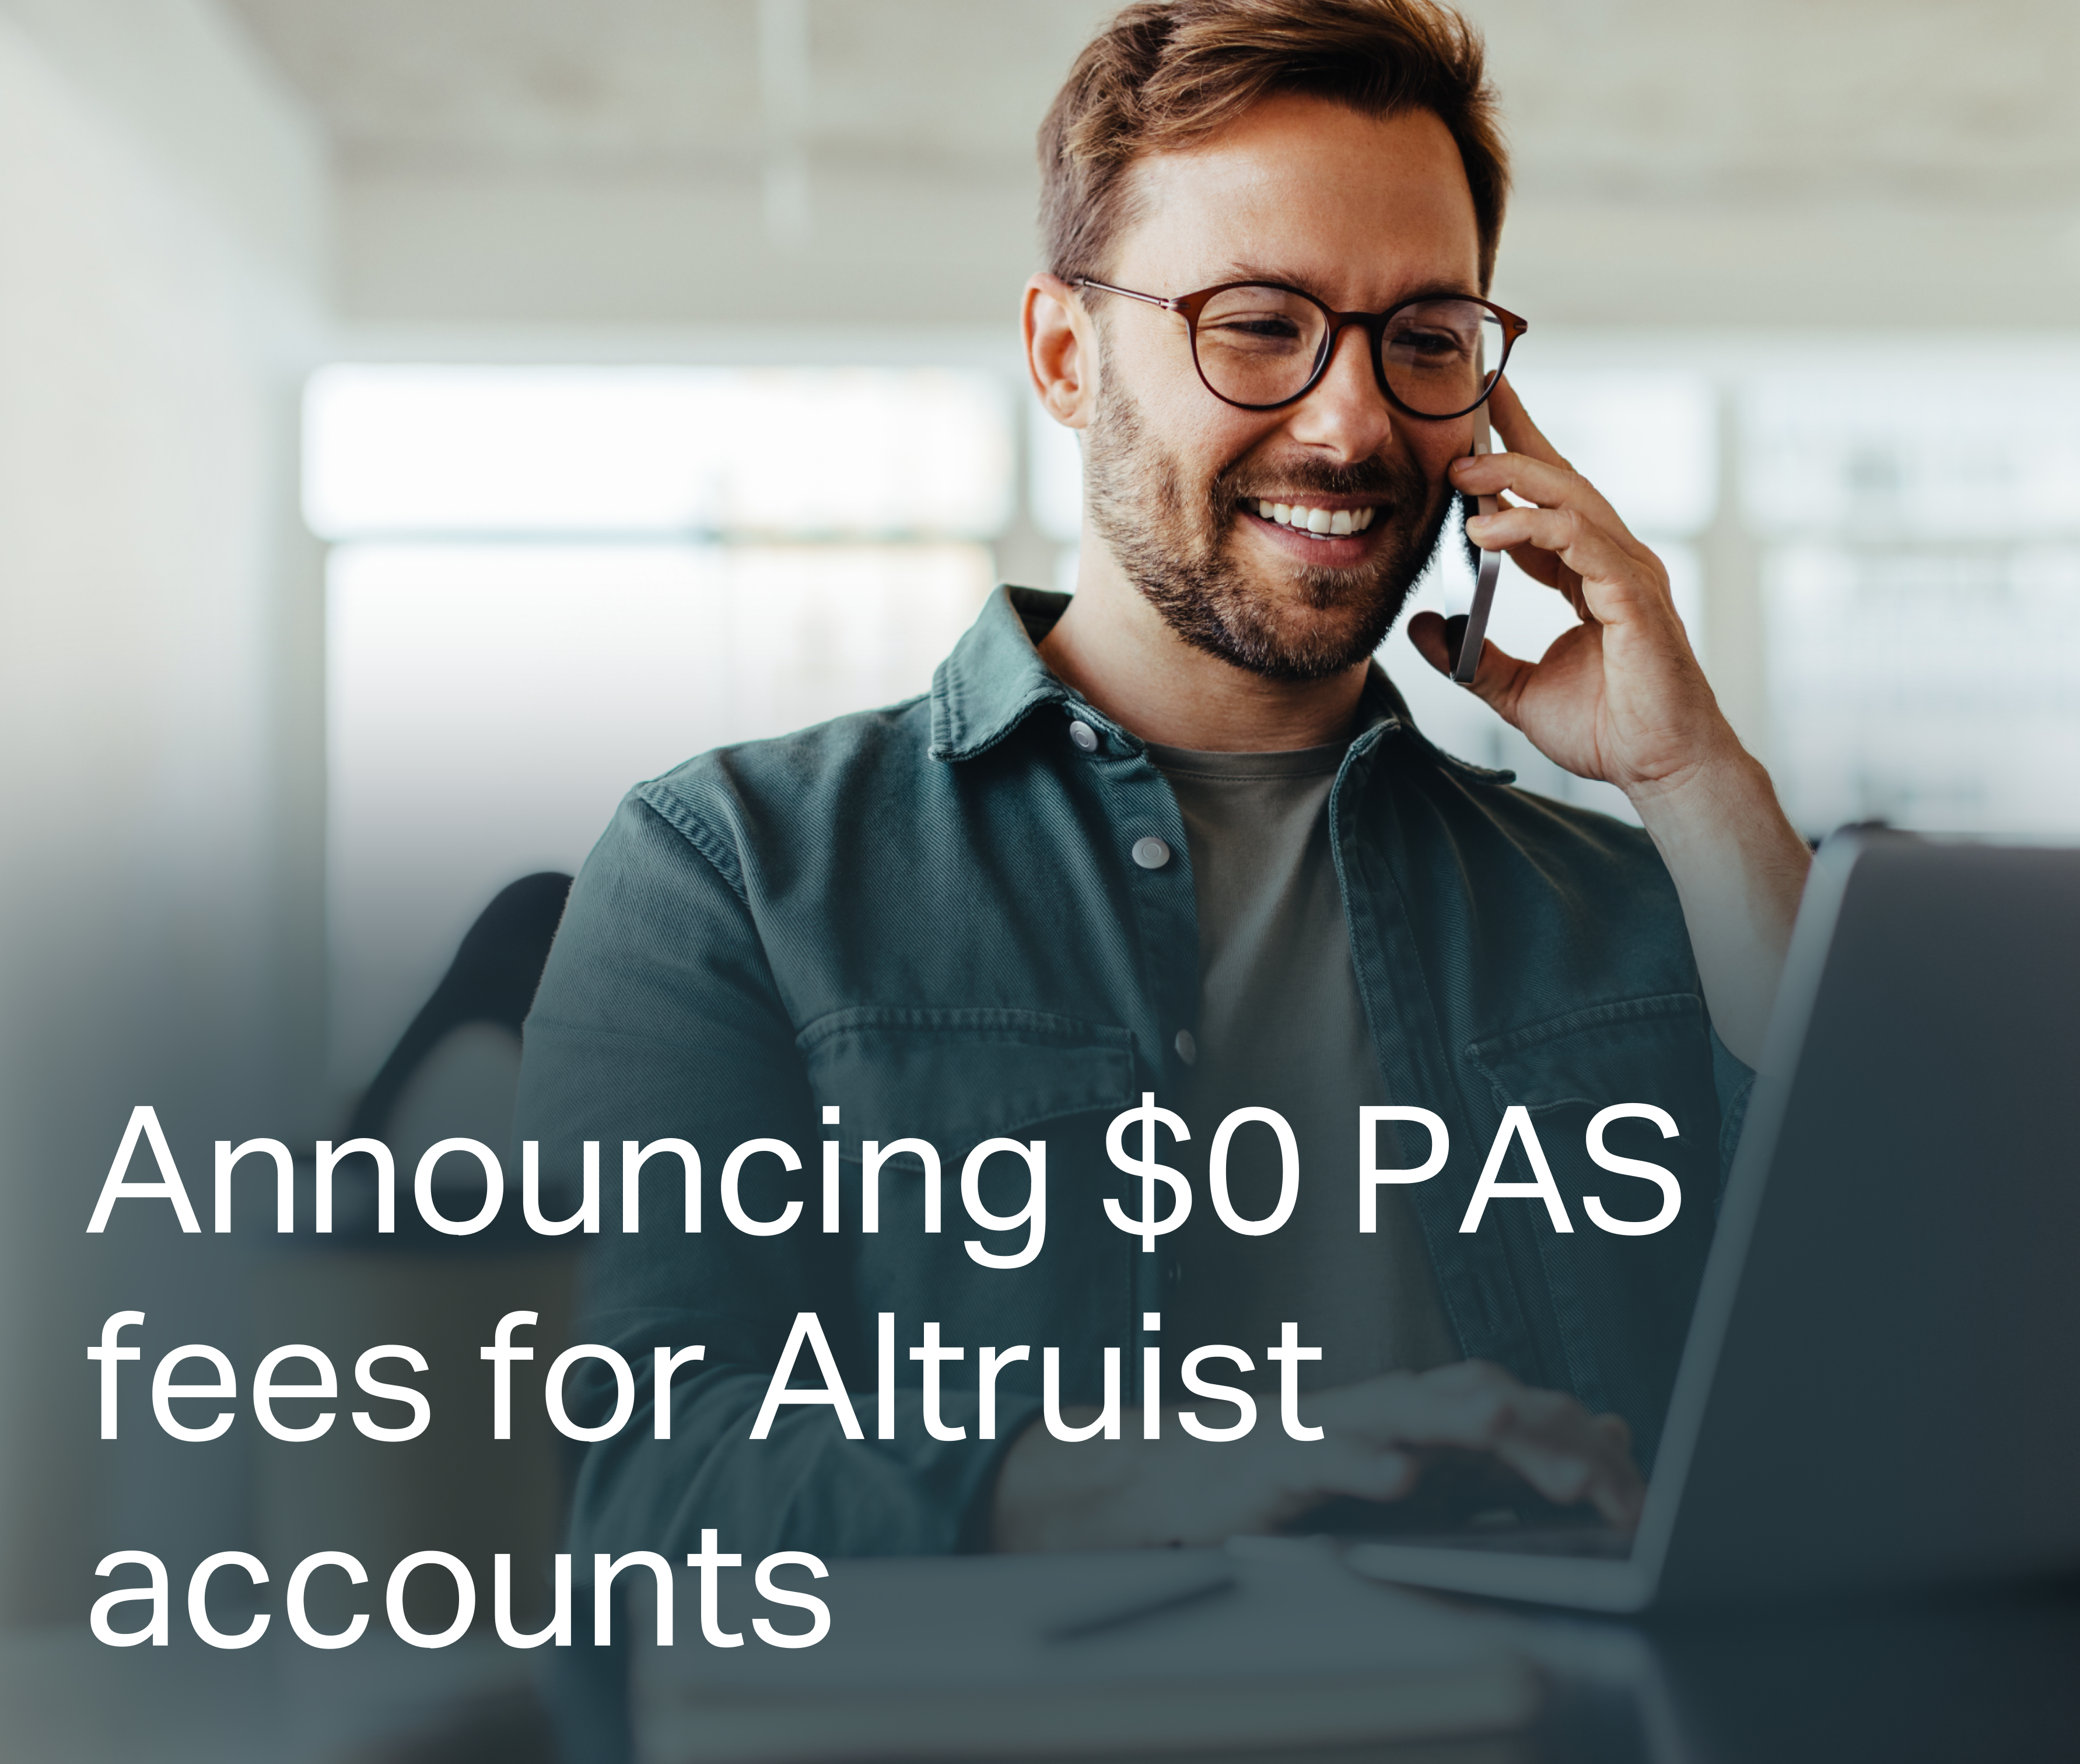 Eliminating PAS fees for Altruist brokerage accounts